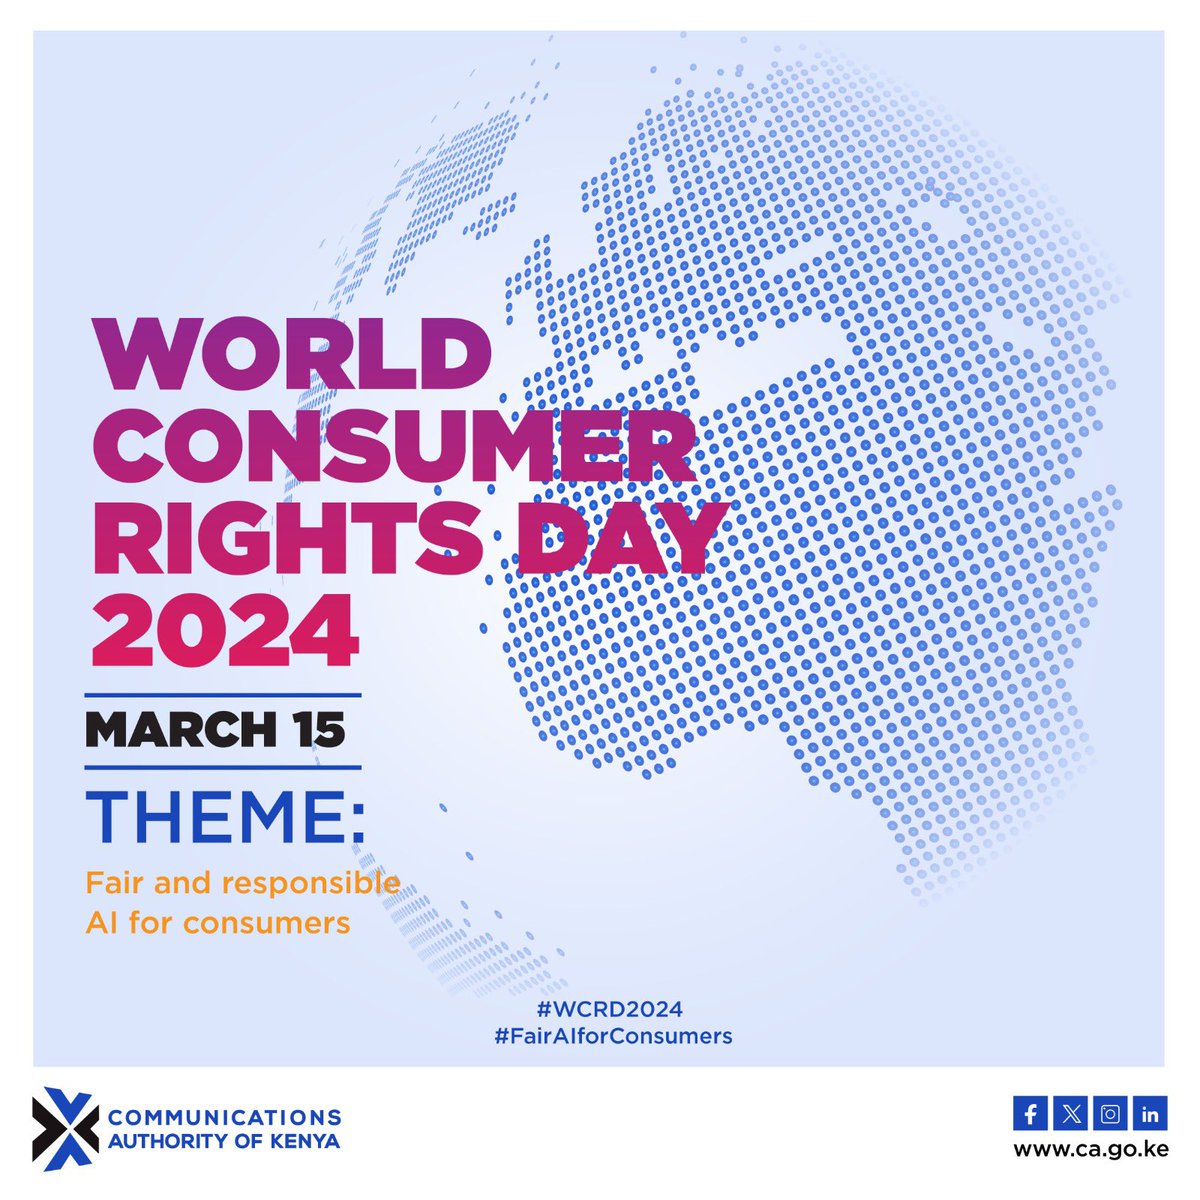 Today being #WorldConsumerRightsDay , The Communications Authority reaffirms its commitment to empowering consumers nationwide. This commitment extends to mobilizing action on critical issues and campaigns concerning consumer protection.

#FairAIForConsumers #KnowYourRightsKE